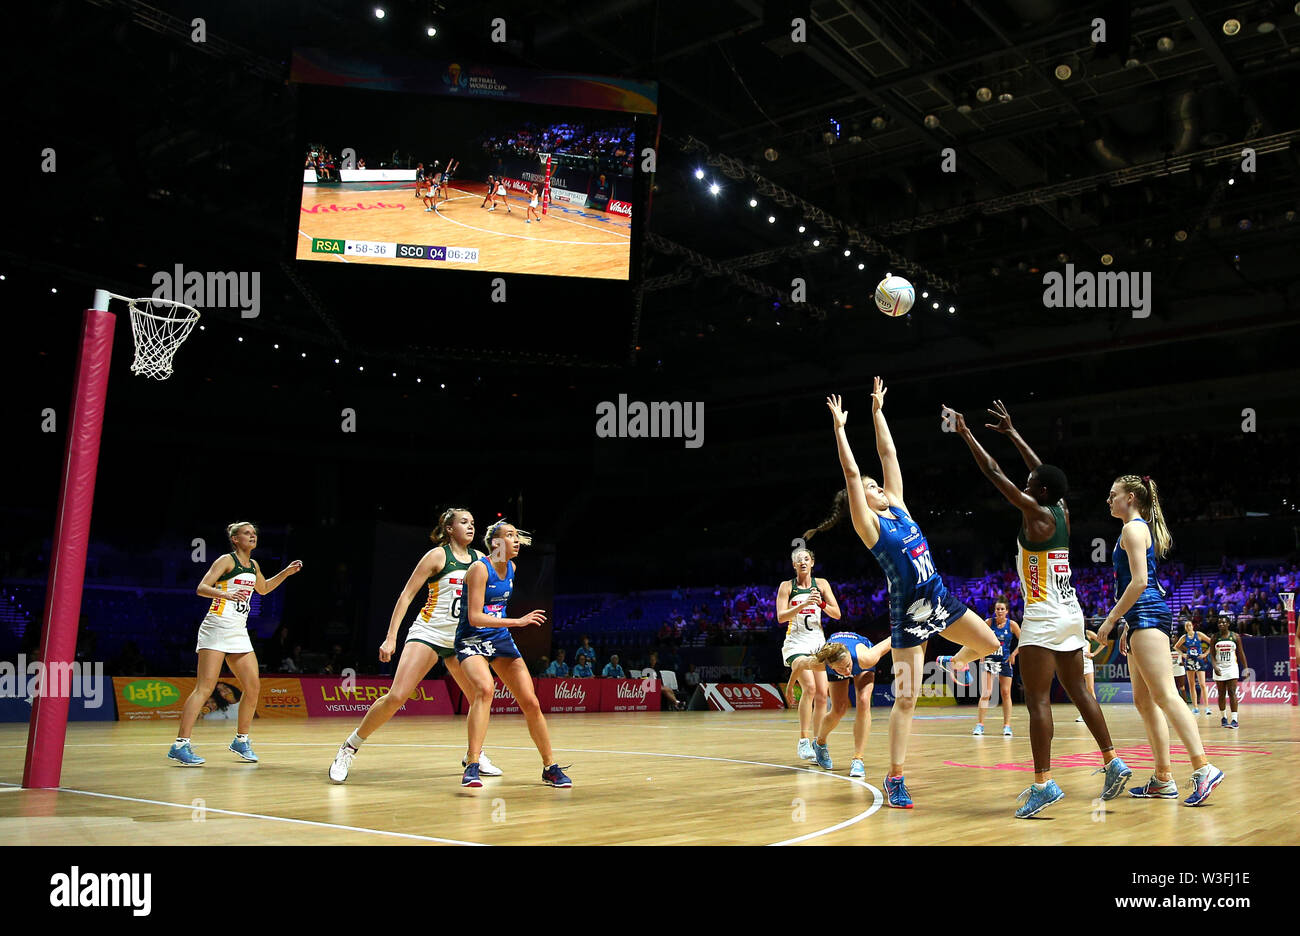 A general view of match action between Scotland and South Africa during the Netball World Cup match at the M&S Bank Arena, Liverpool. Stock Photo